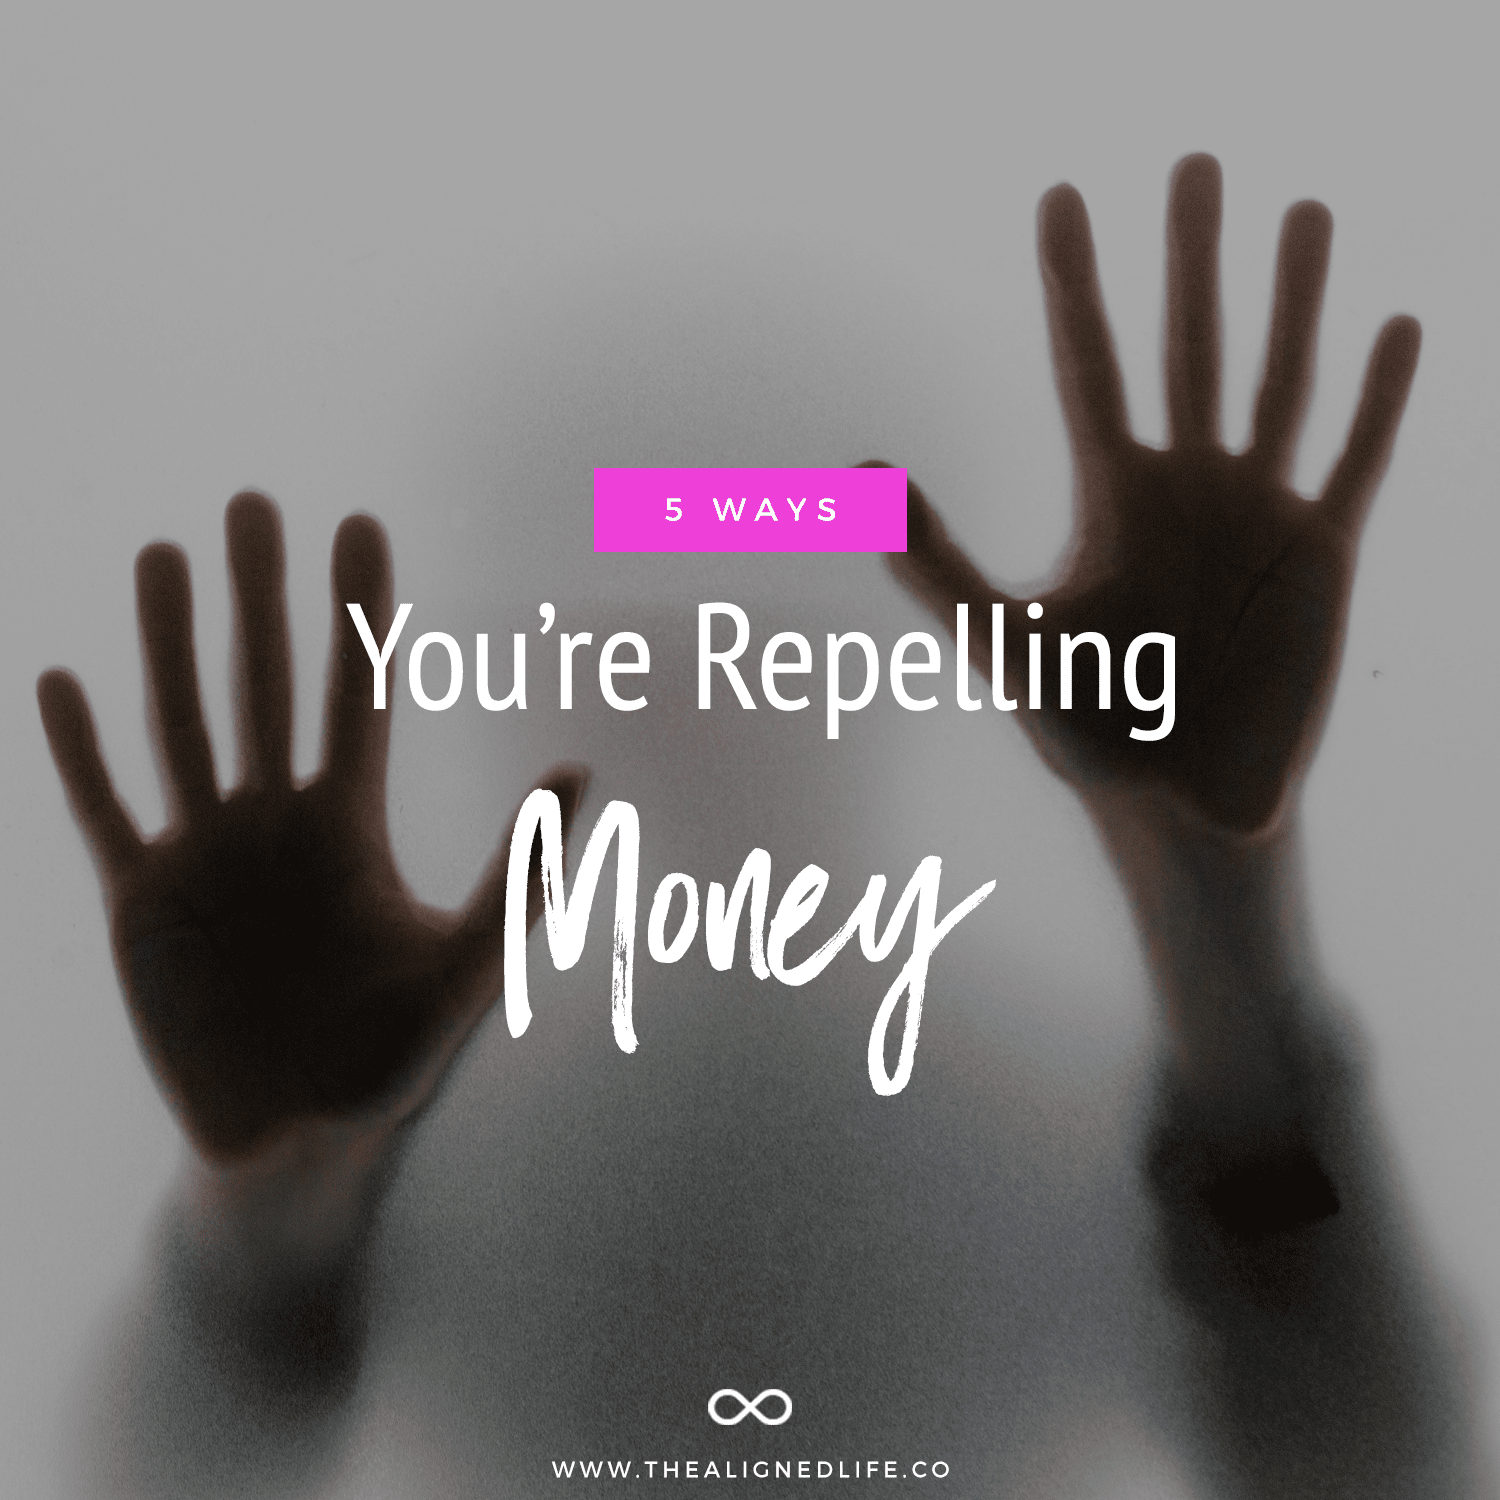 5 Ways You're Repelling Money